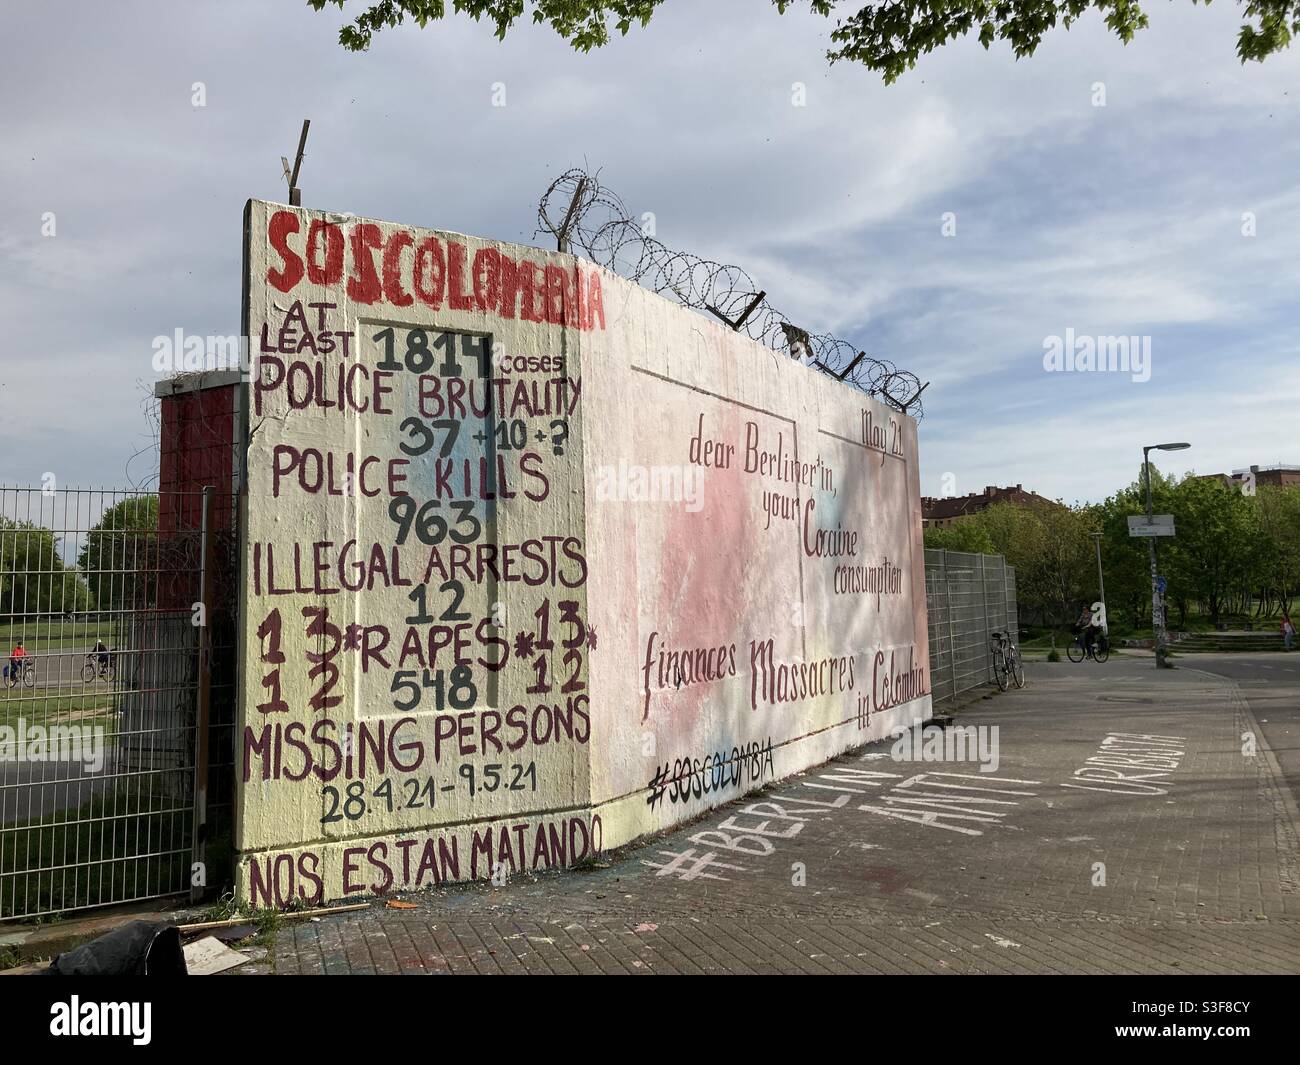 A graffiti in the Berlin district of Neukoelln showing solidarity with protesters in Colombia, May 11 2021, Berlin, Germany Stock Photo